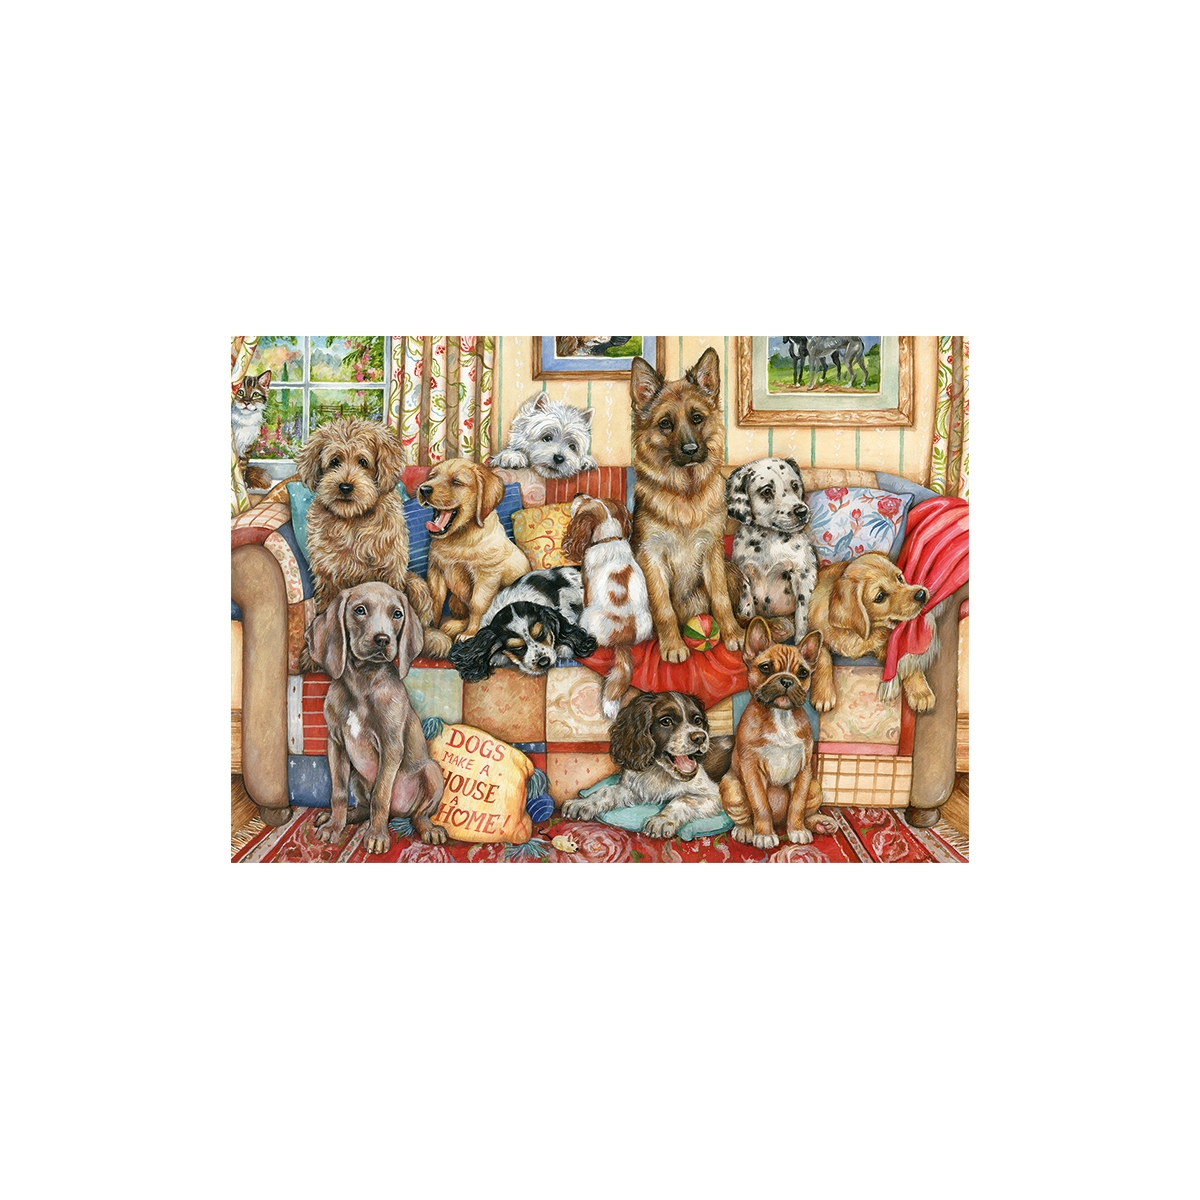 FALCON Jumbo 11293 Gathering Puzzle Couch-1000 Mehrfarben Teile The Dog Zubehör, on